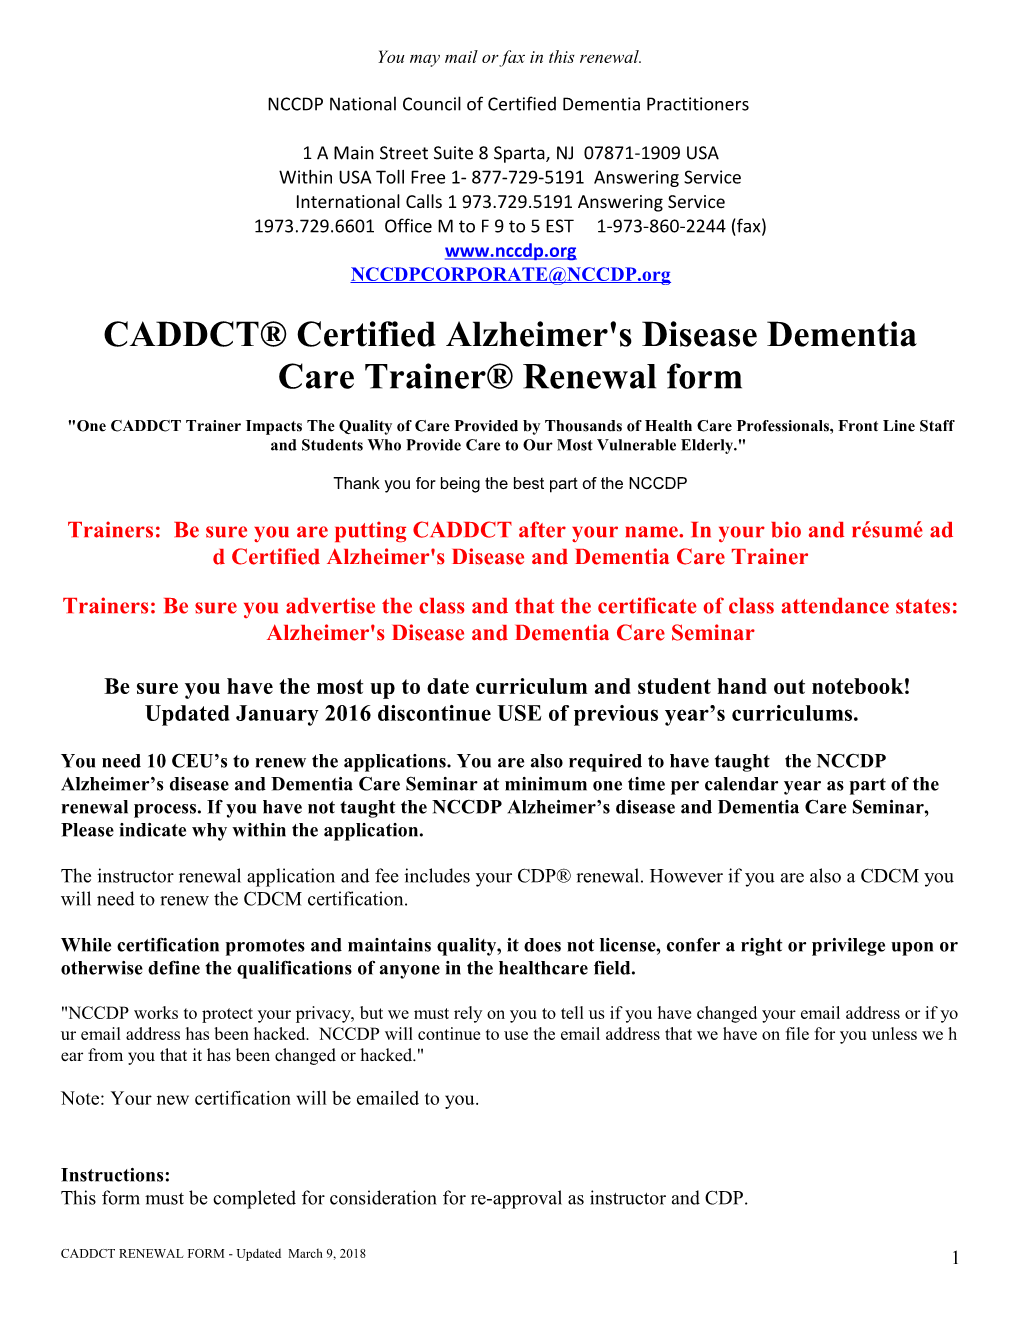 National Council of Certified Dementia Practitioners s1